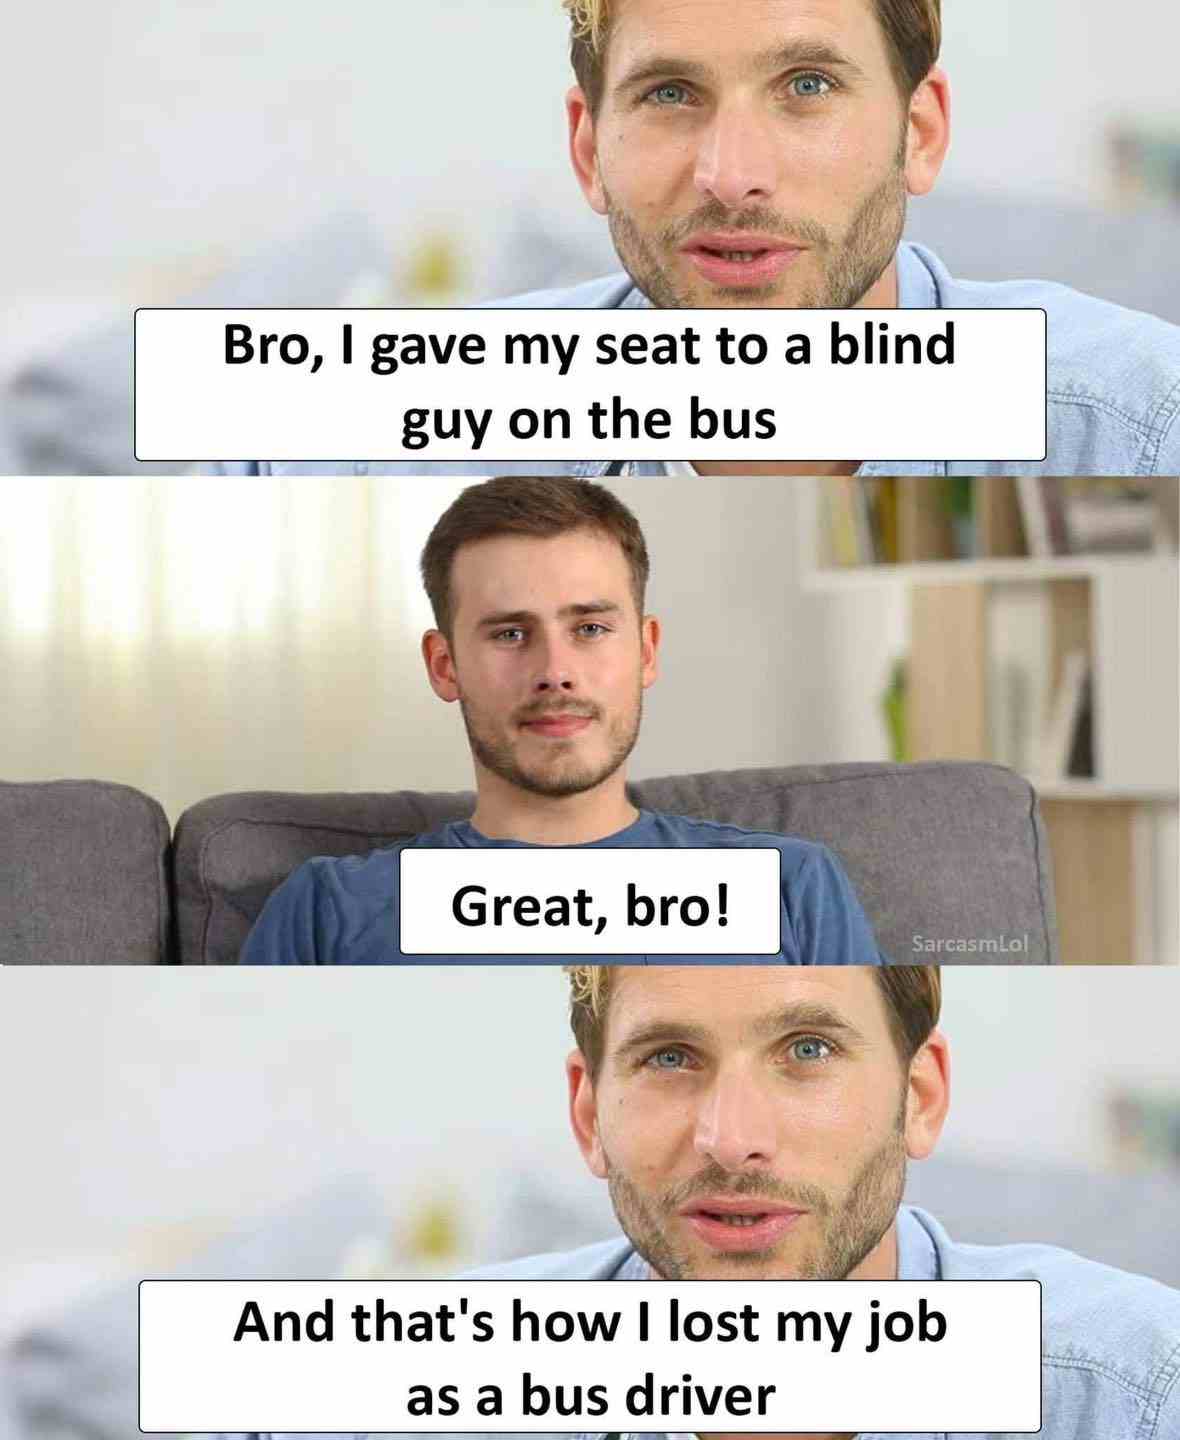 Bro, I gave my seat to a blind guy on the bus